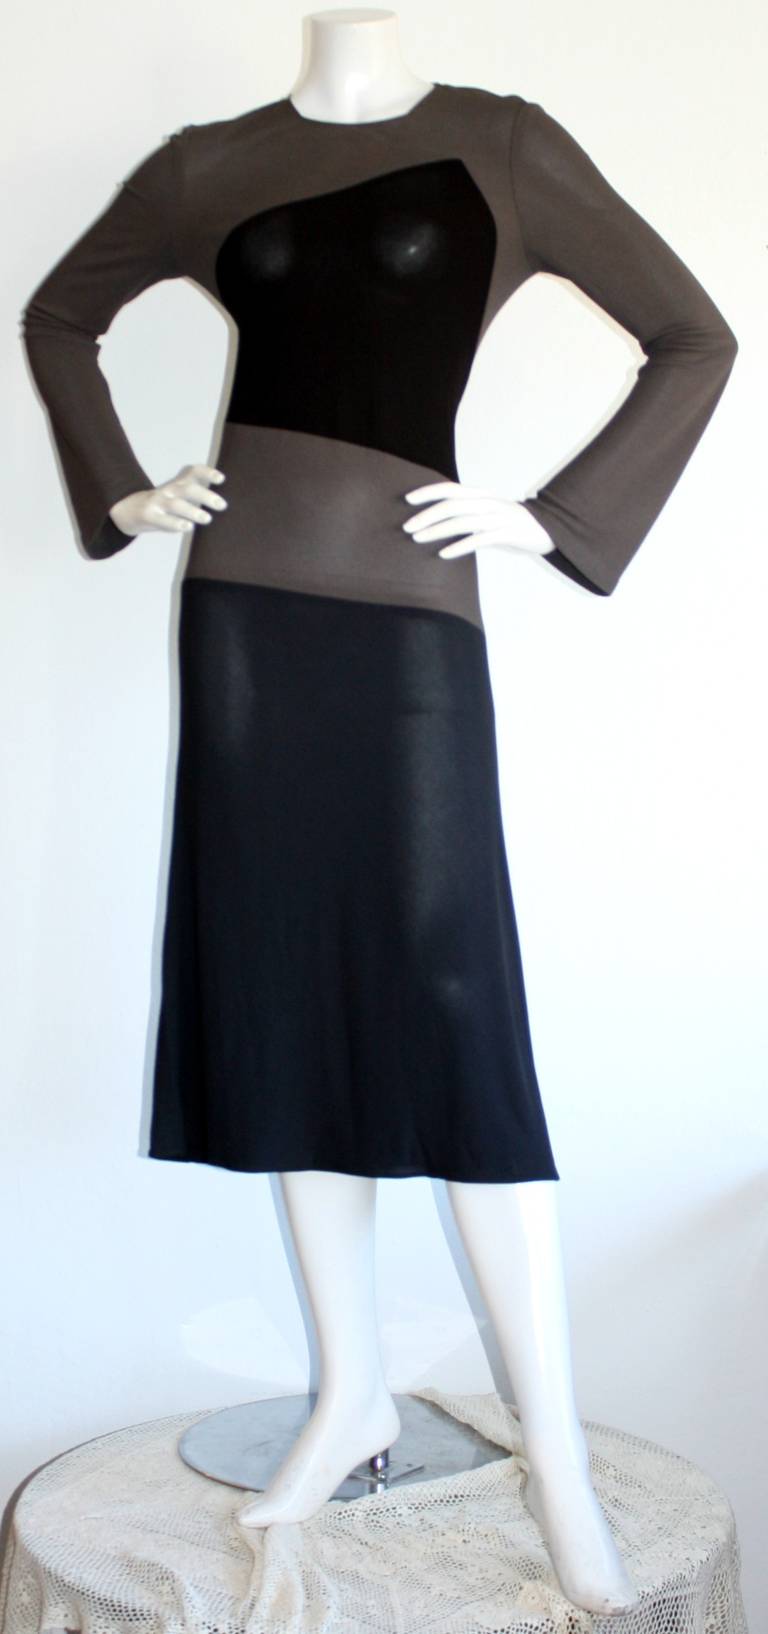 Wonderful vintage Calvin Klein Collection dress! Chic color-blocking, with grey, taupe and black. Slight flared sleeves. In great condition. Approximately Size Small-Medium (has some stretch)

Measurements:
34-38 inch bust
28-32 inch